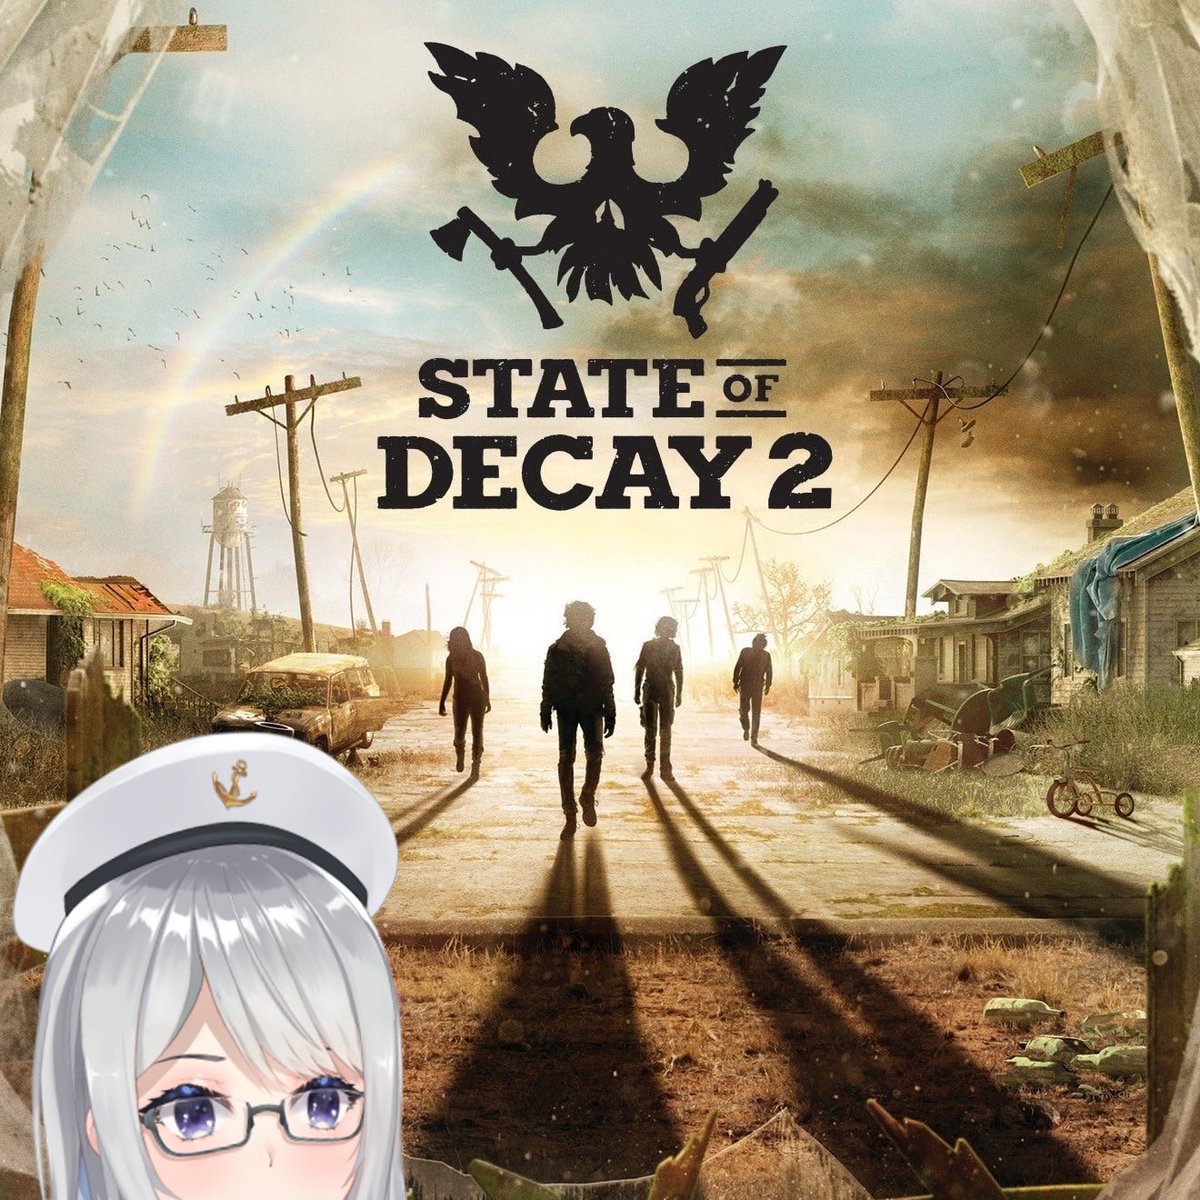 So tonight we are live.... among the undead of this game
State of decay Firestation rushing stream!
(Standard diff)
#VTuber #ENVTuber #MYVTuber